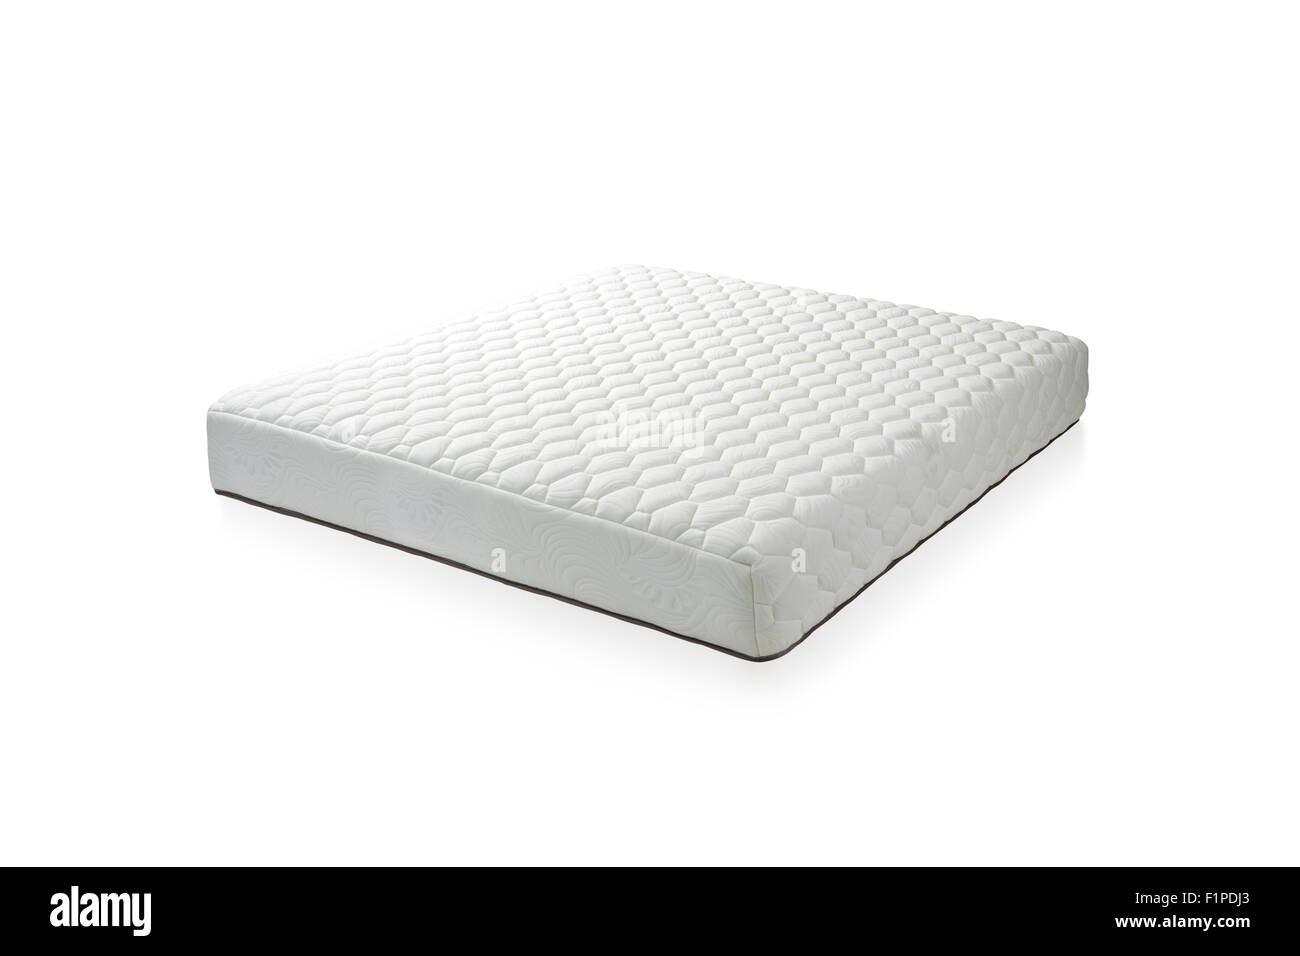 Mattress that supported you to sleep well all night, the image isolated on white background Stock Photo